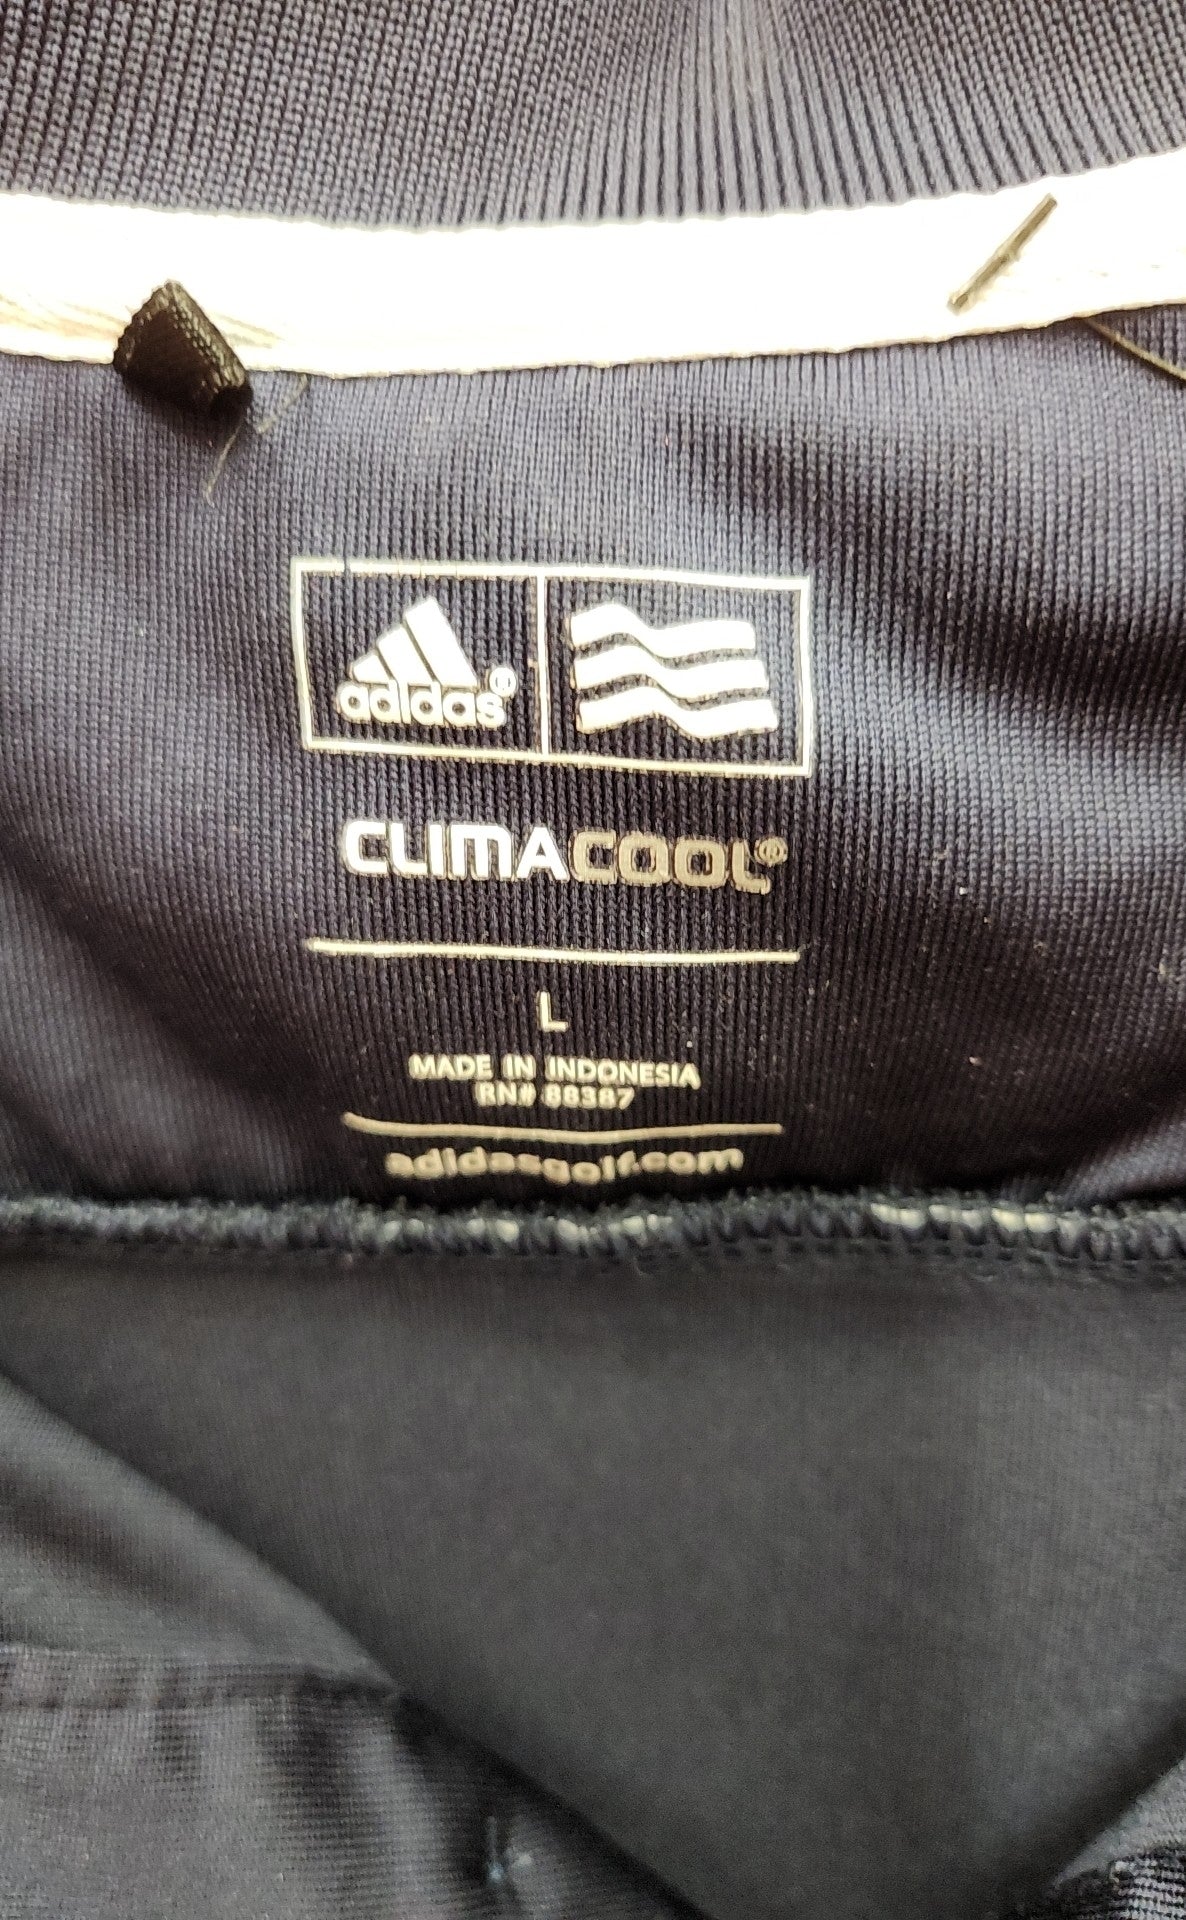 Adidas Men's Size L Navy Shirt Climacool polo